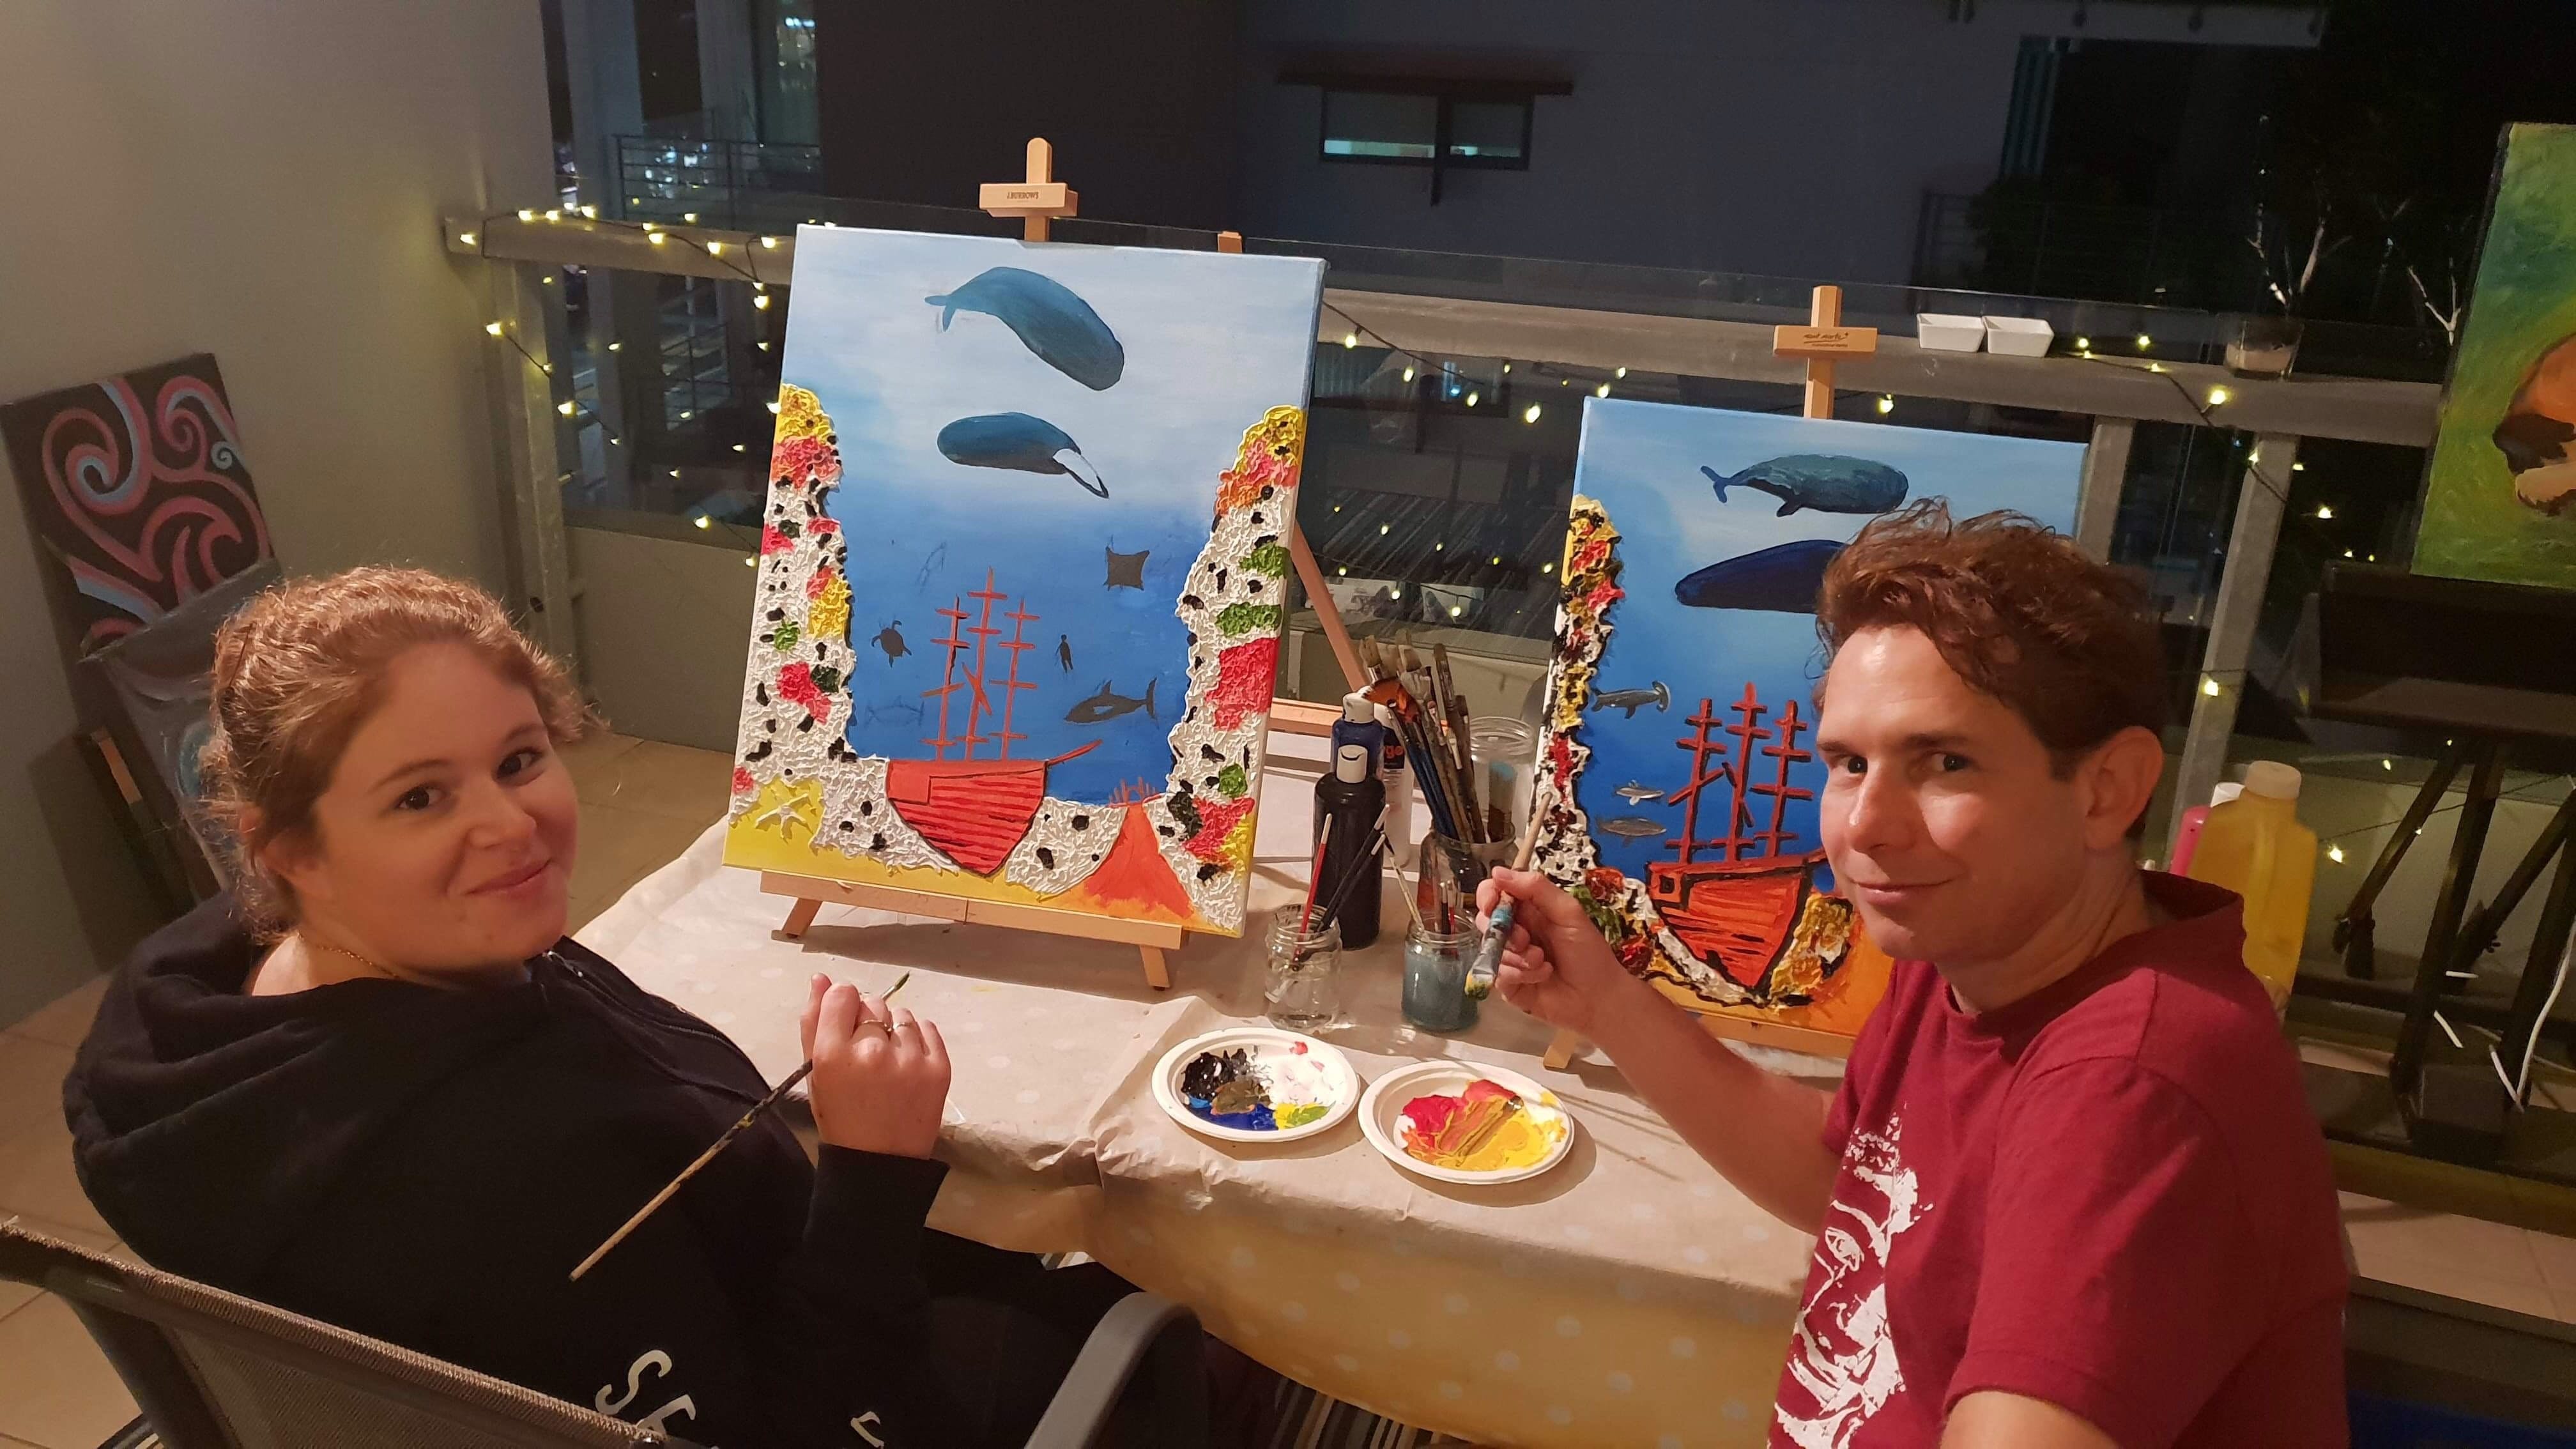 Paint and Sip Social Art Classes 2 for 1 - Carnarvon Accommodation